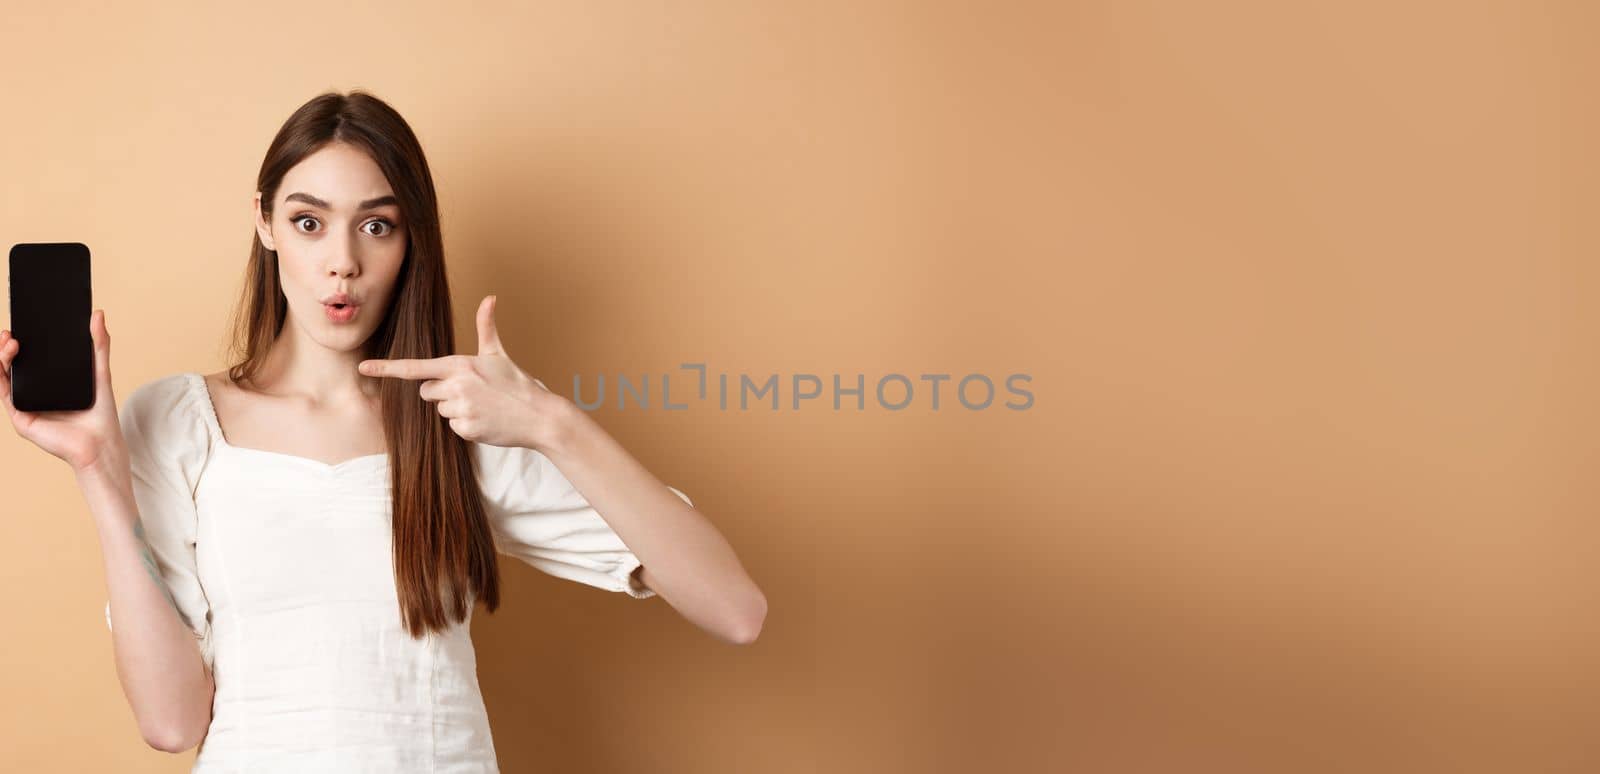 Excited woman showing news on screen, pointing at empty phone and looking surprised, standing on beige background.